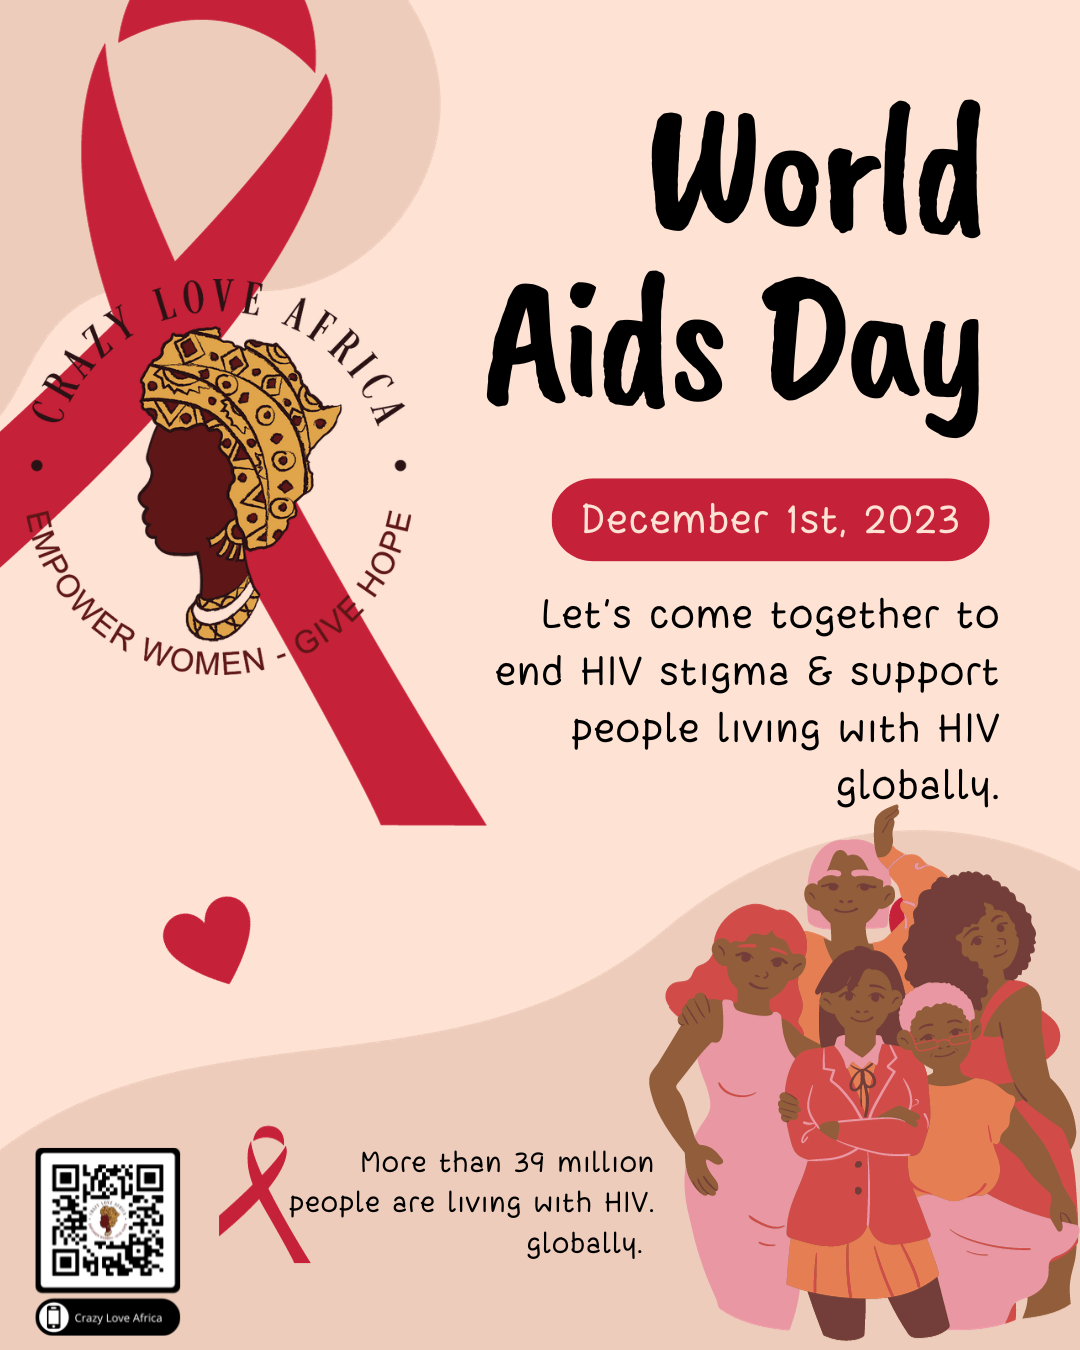 World AIDS Day 2023: How You Can Help